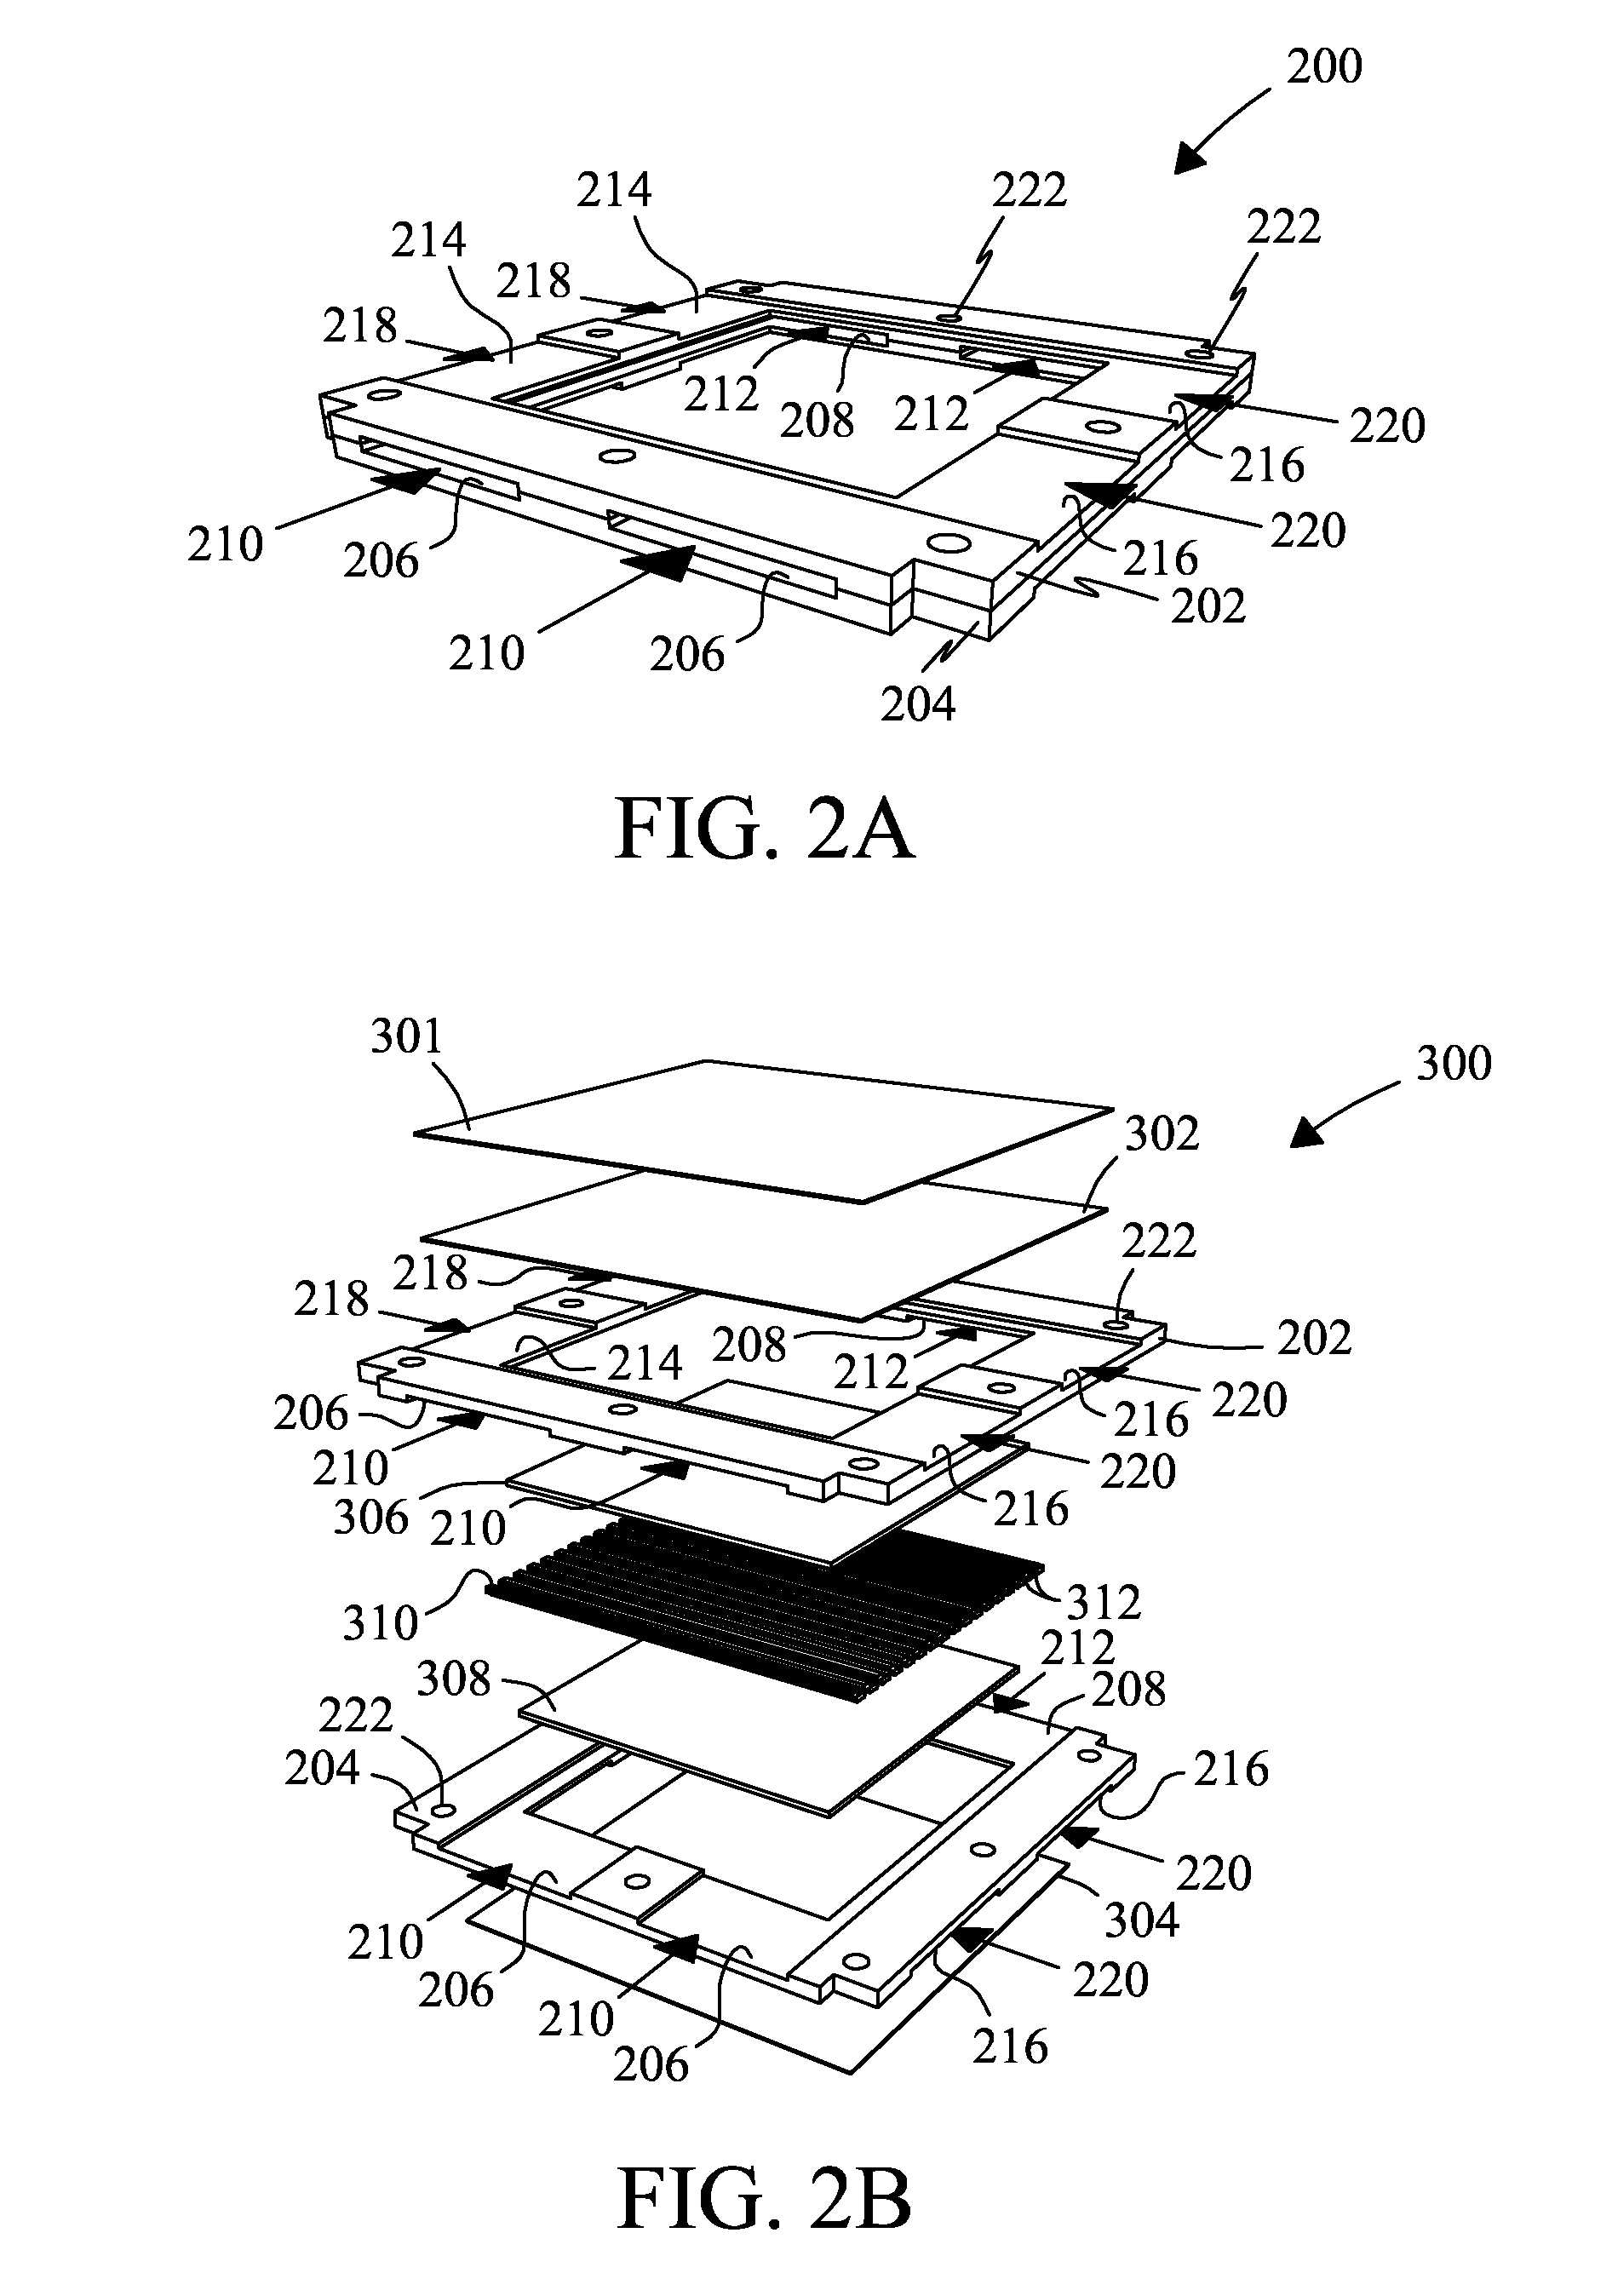 Membrane device and process for mass exchange, separation, and filtration